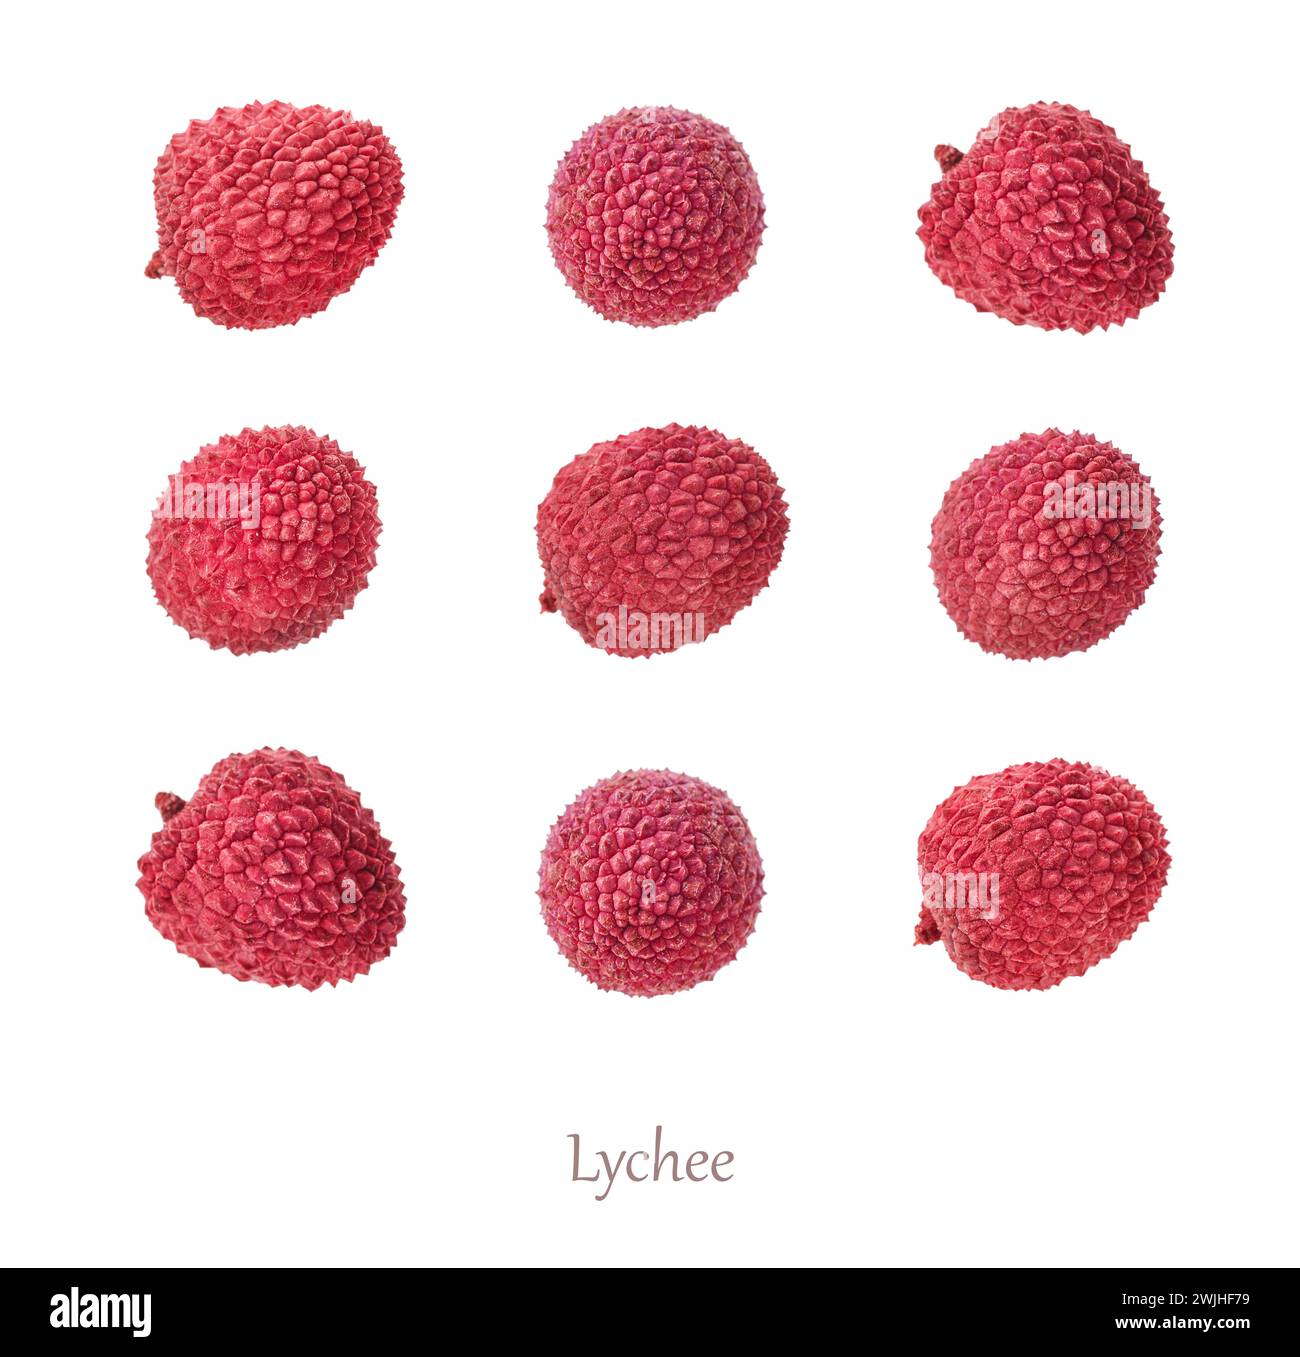 Set of lychee berries, isolated on white background Stock Photo